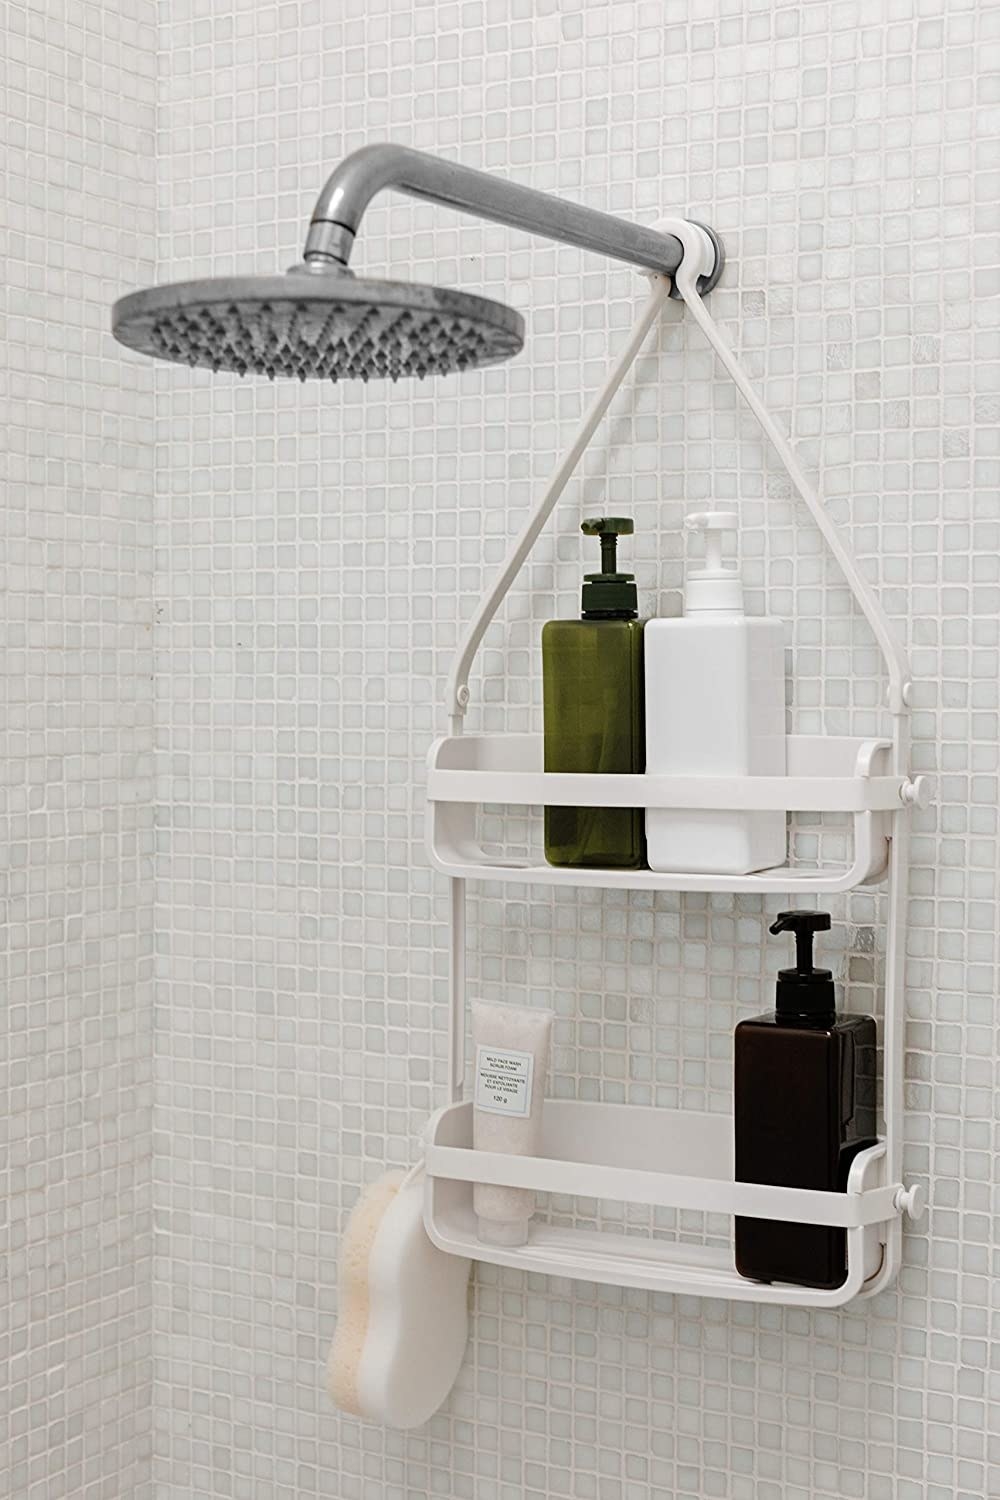 A flexible shower caddy mounted on a shower